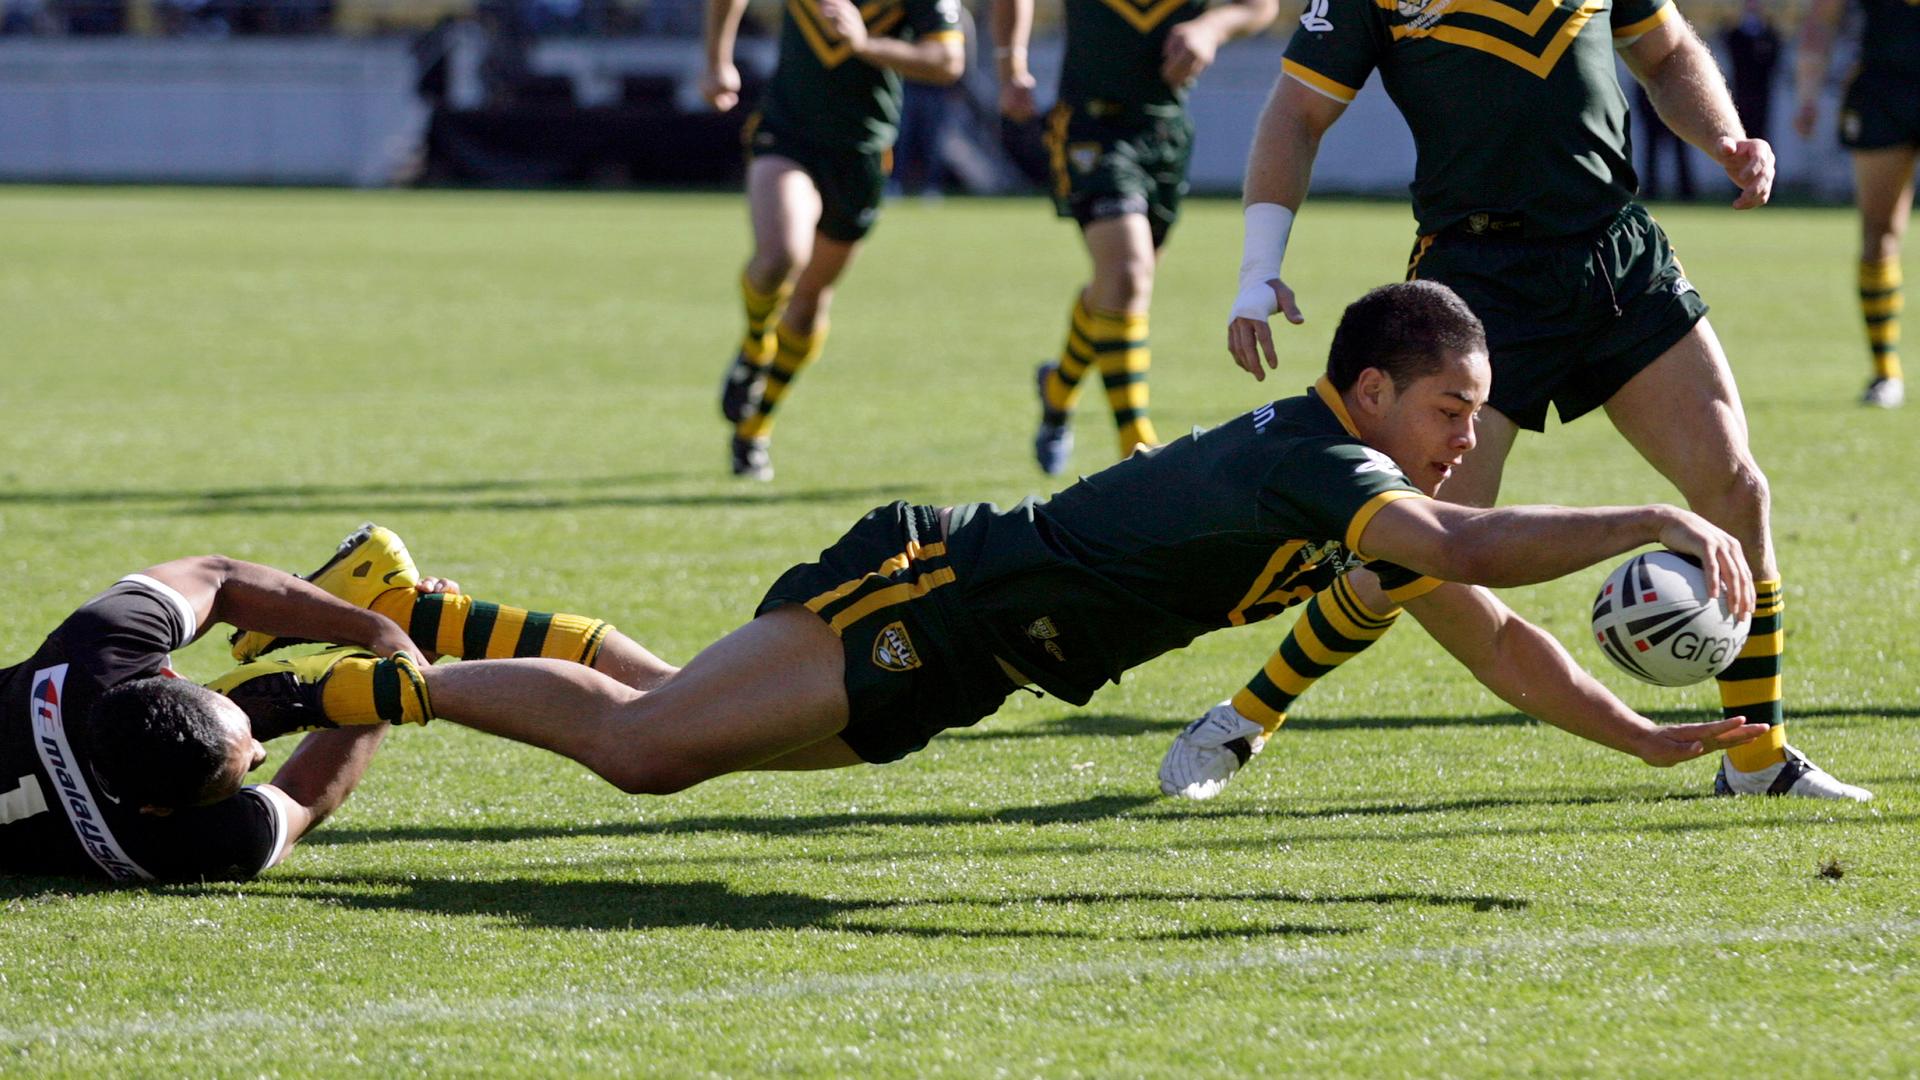 Jarryd Hayne scores during the centenary rugby league test match between Australia and New Zealand in Wellington, 2007.